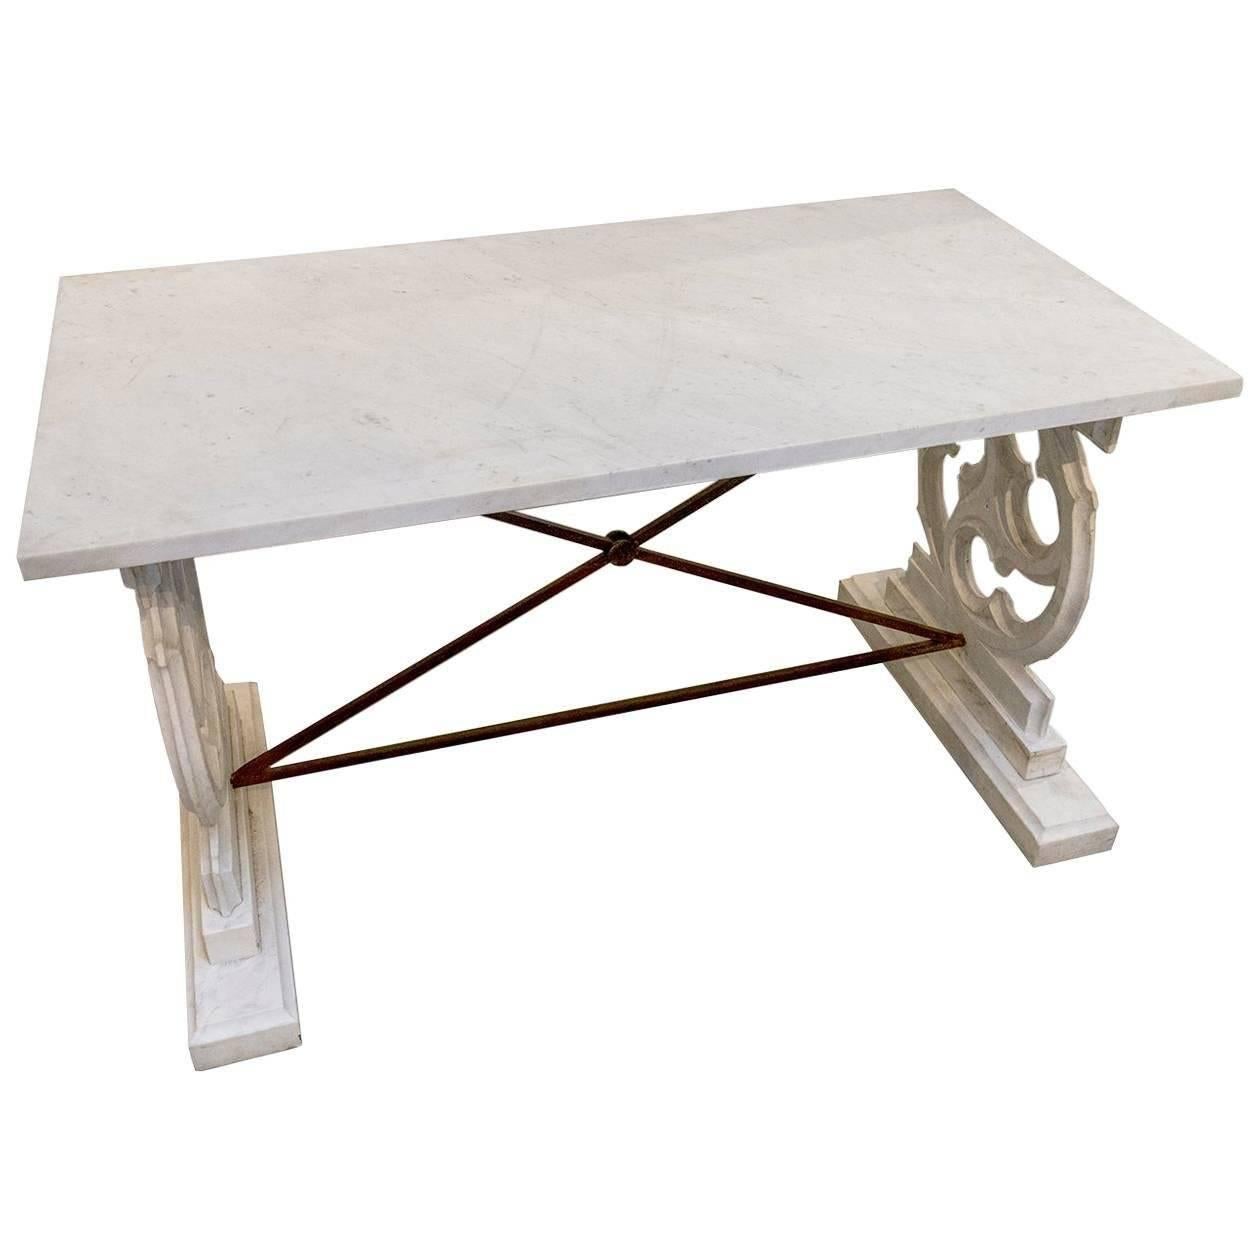 White Carrara Marble Console Table or Work Table.